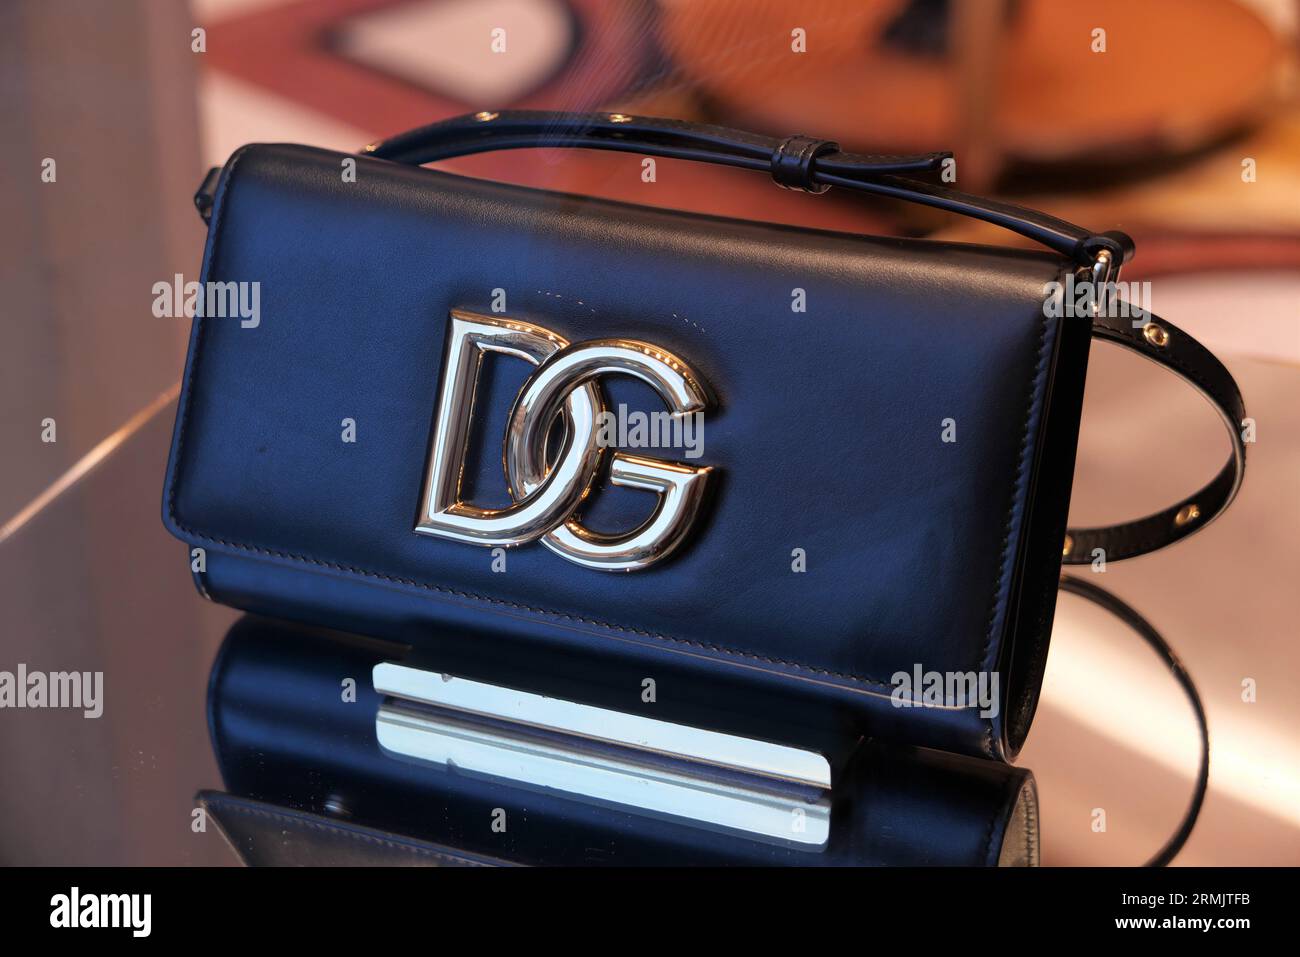 WOMAN'S BAG ON DISPLAY INSIDE THE DOLCE GABBANA FASHION BOUTIQUE Stock  Photo - Alamy